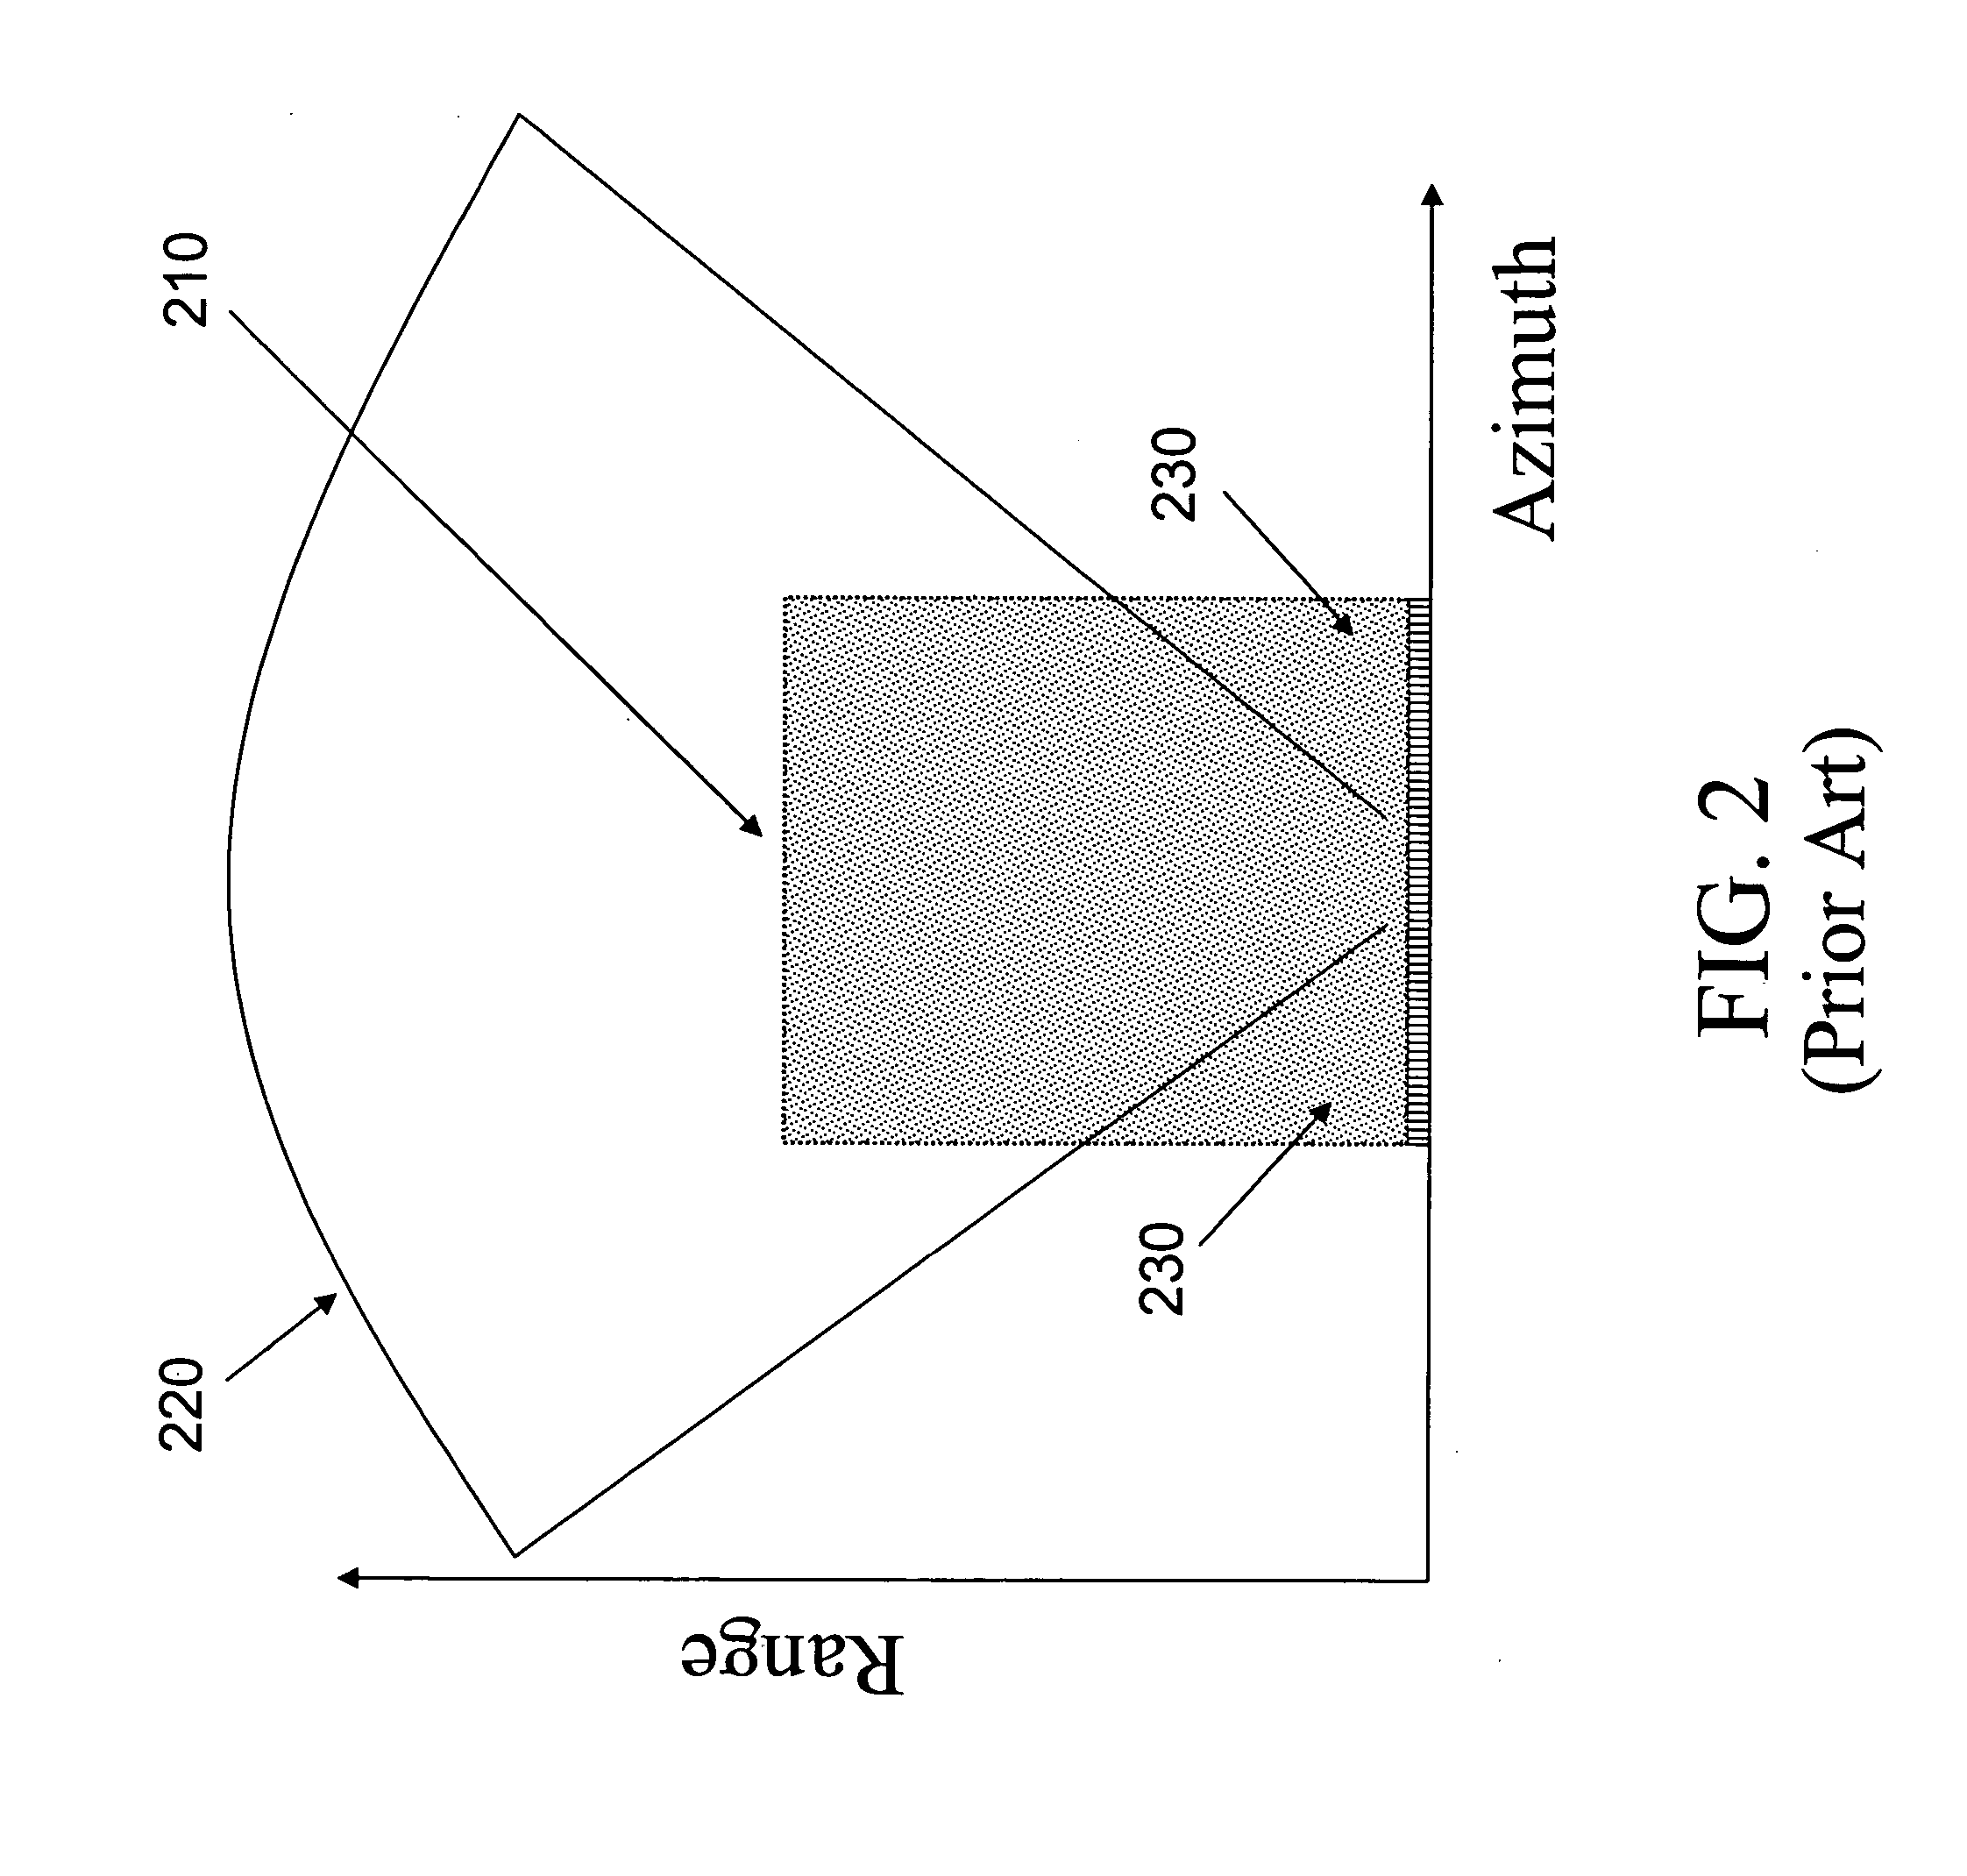 System and method of operating microfabricated ultrasonic transducers for harmonic imaging